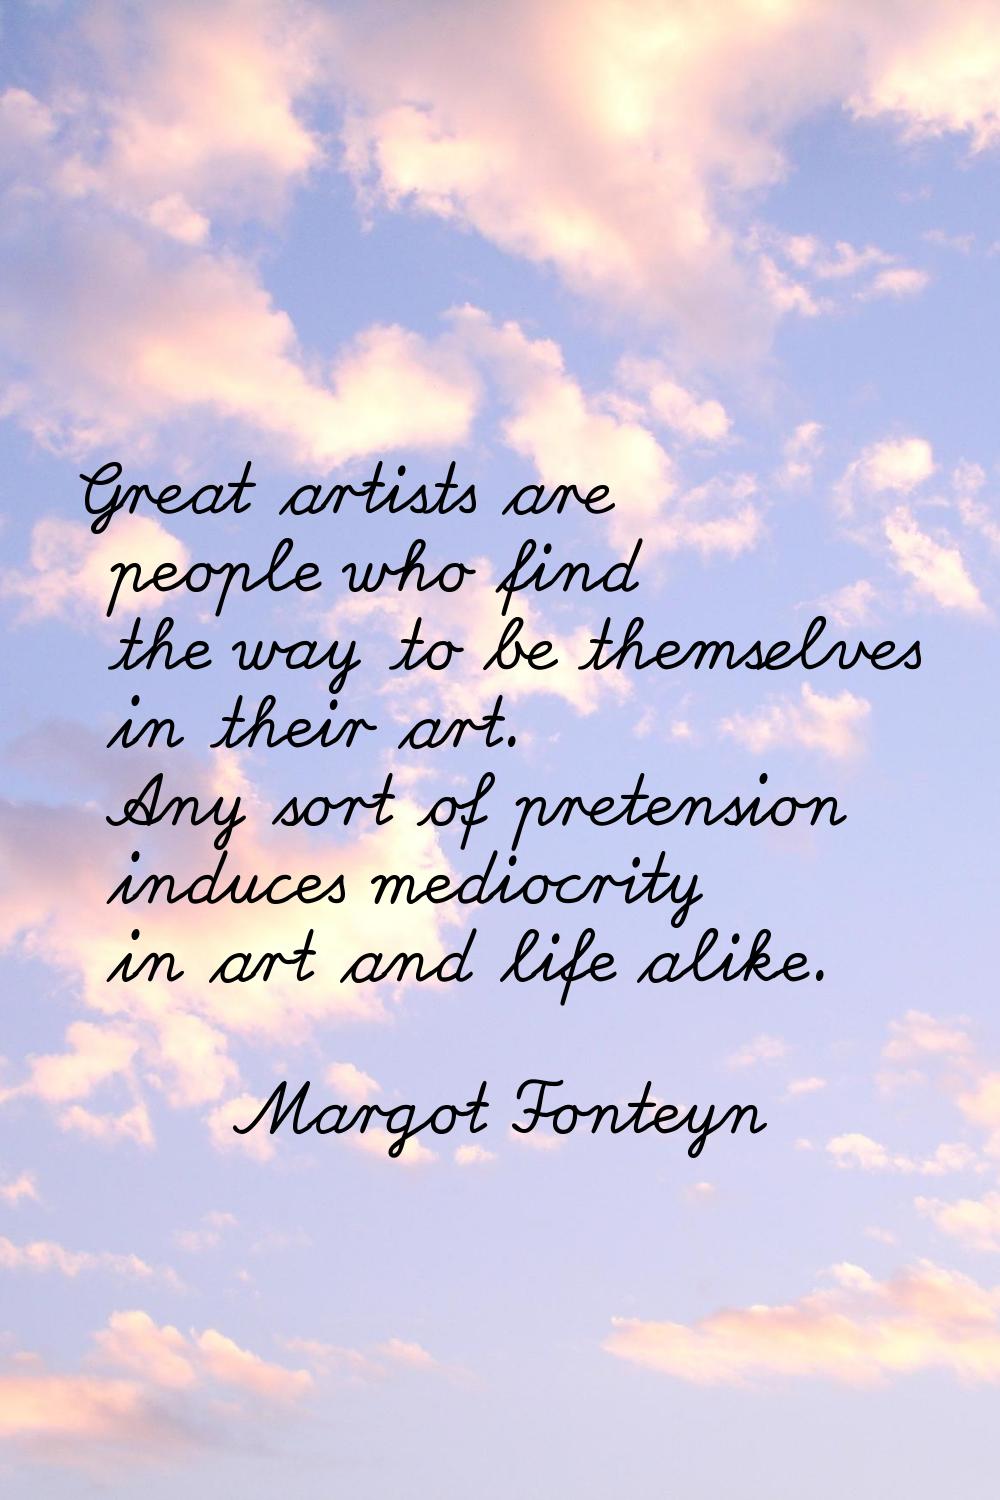 Great artists are people who find the way to be themselves in their art. Any sort of pretension ind